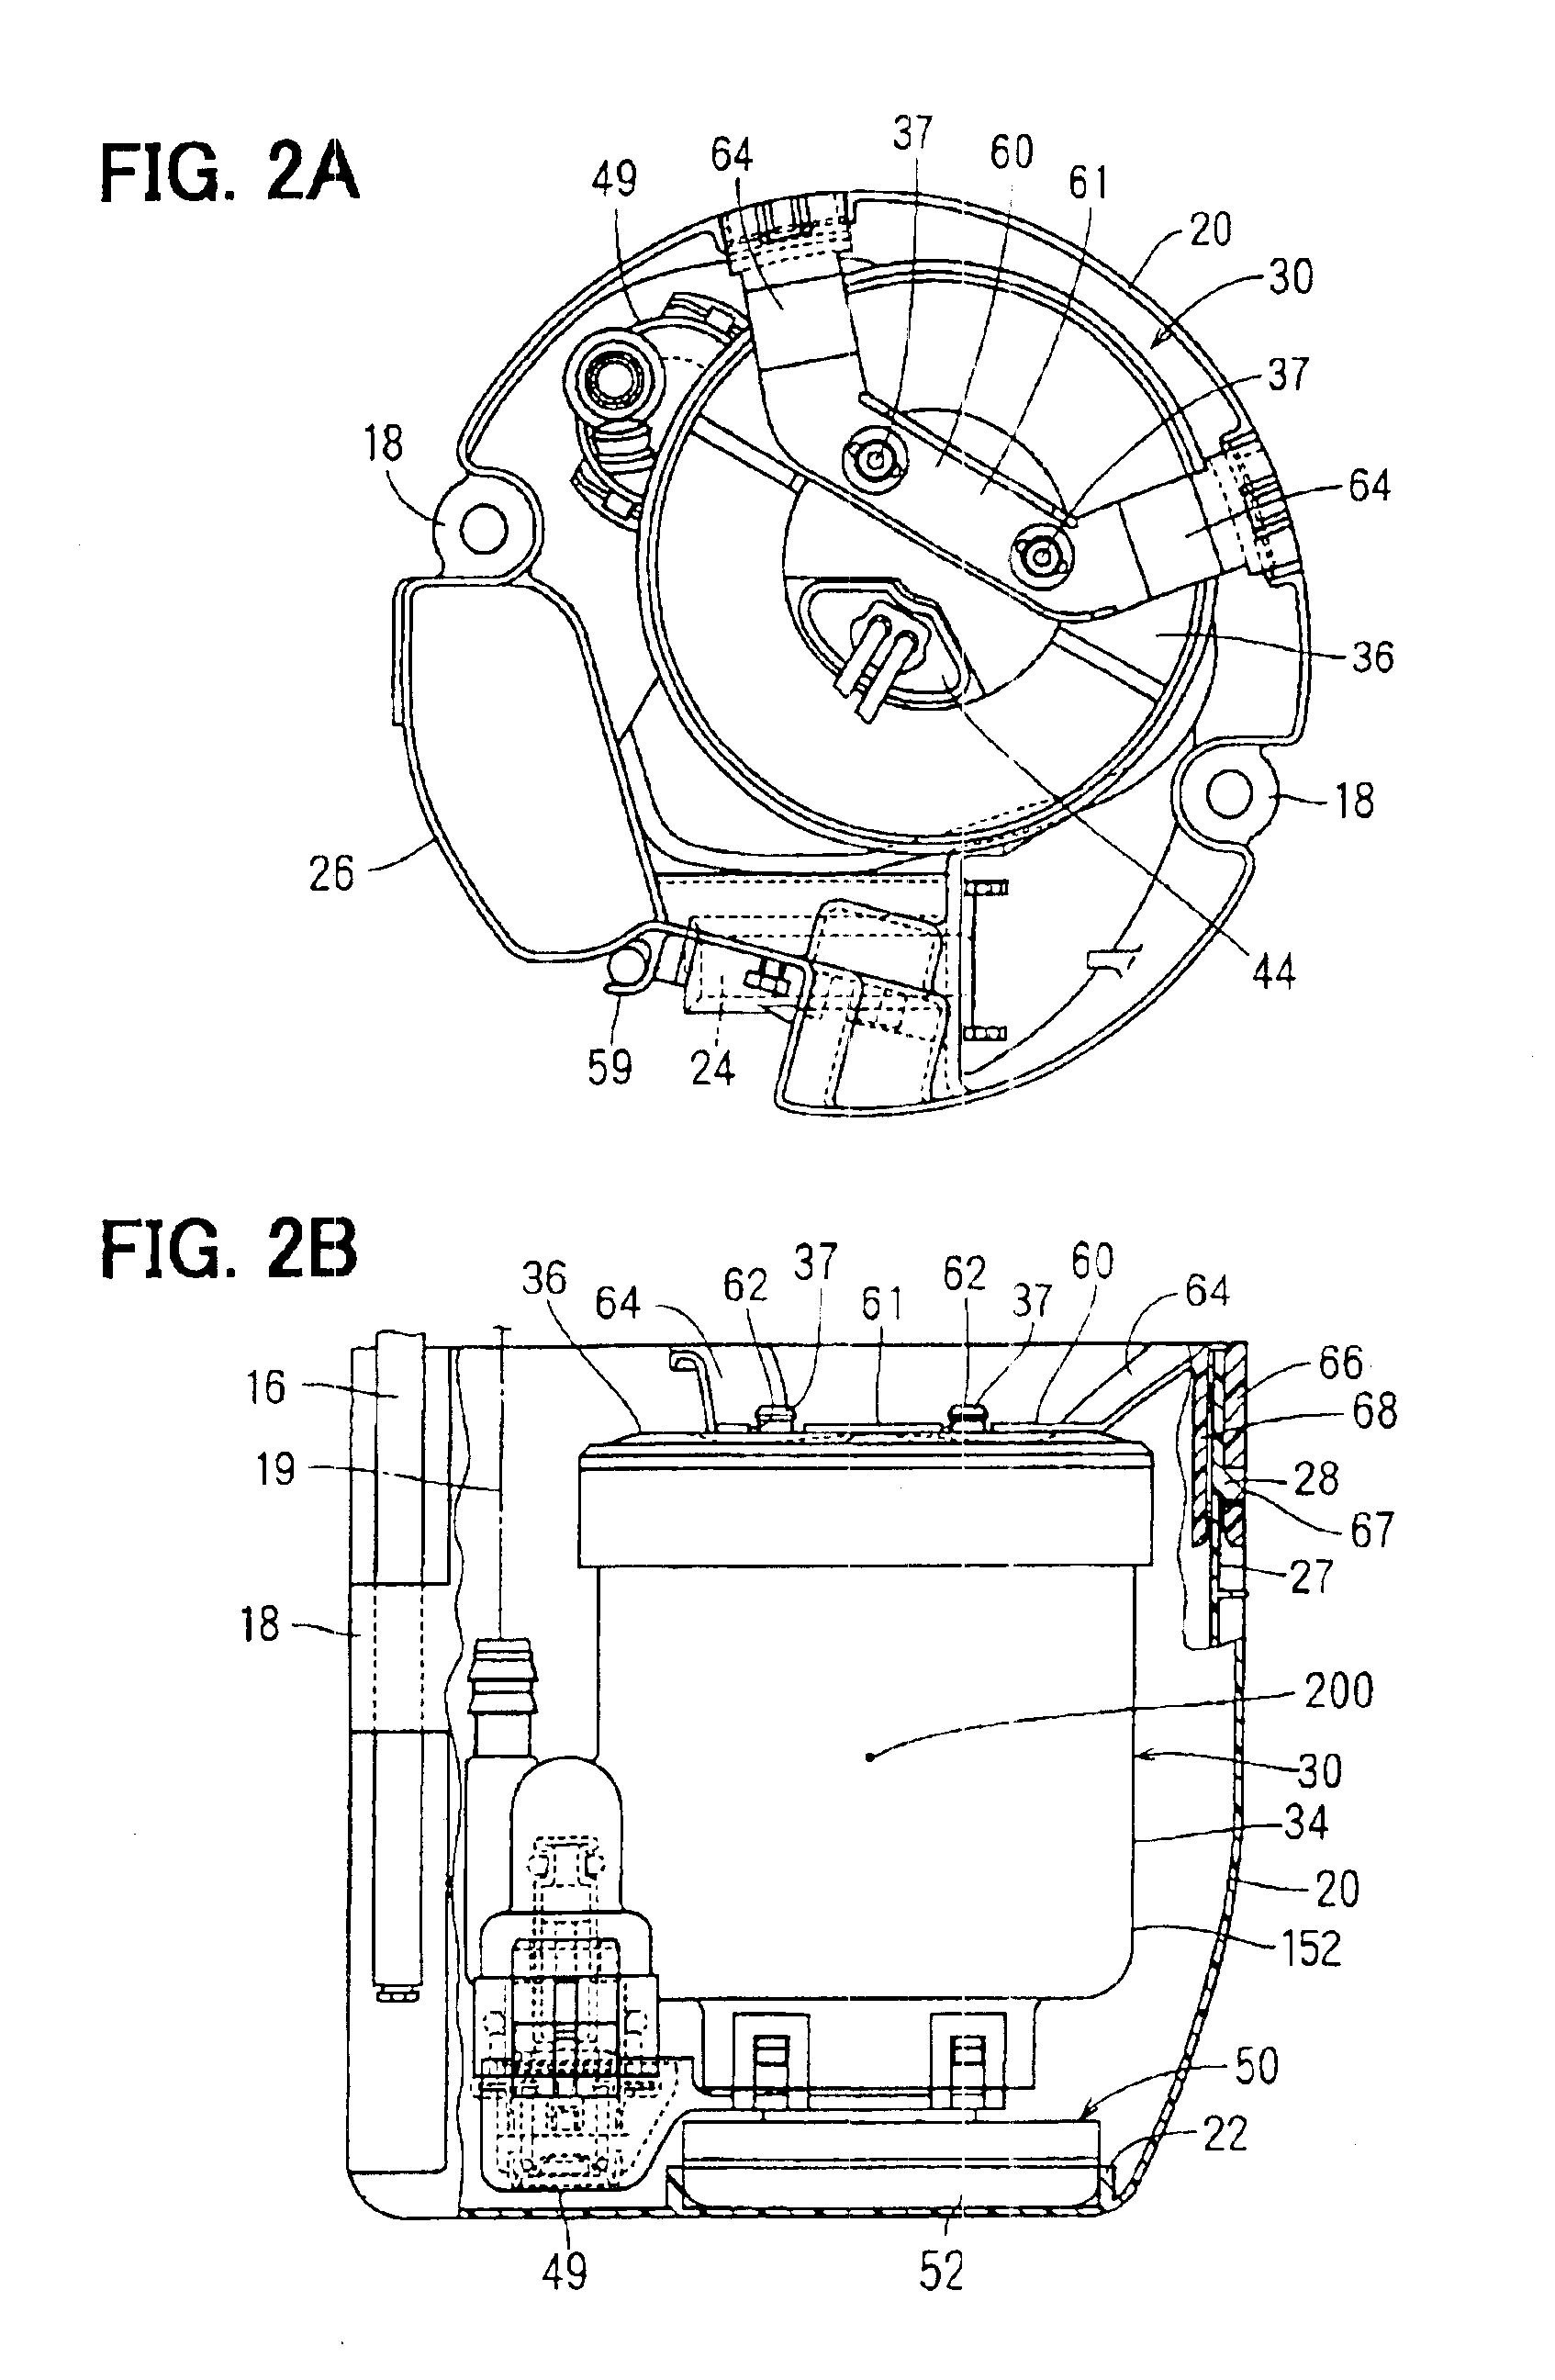 Fuel feed apparatus having vibration damping structure